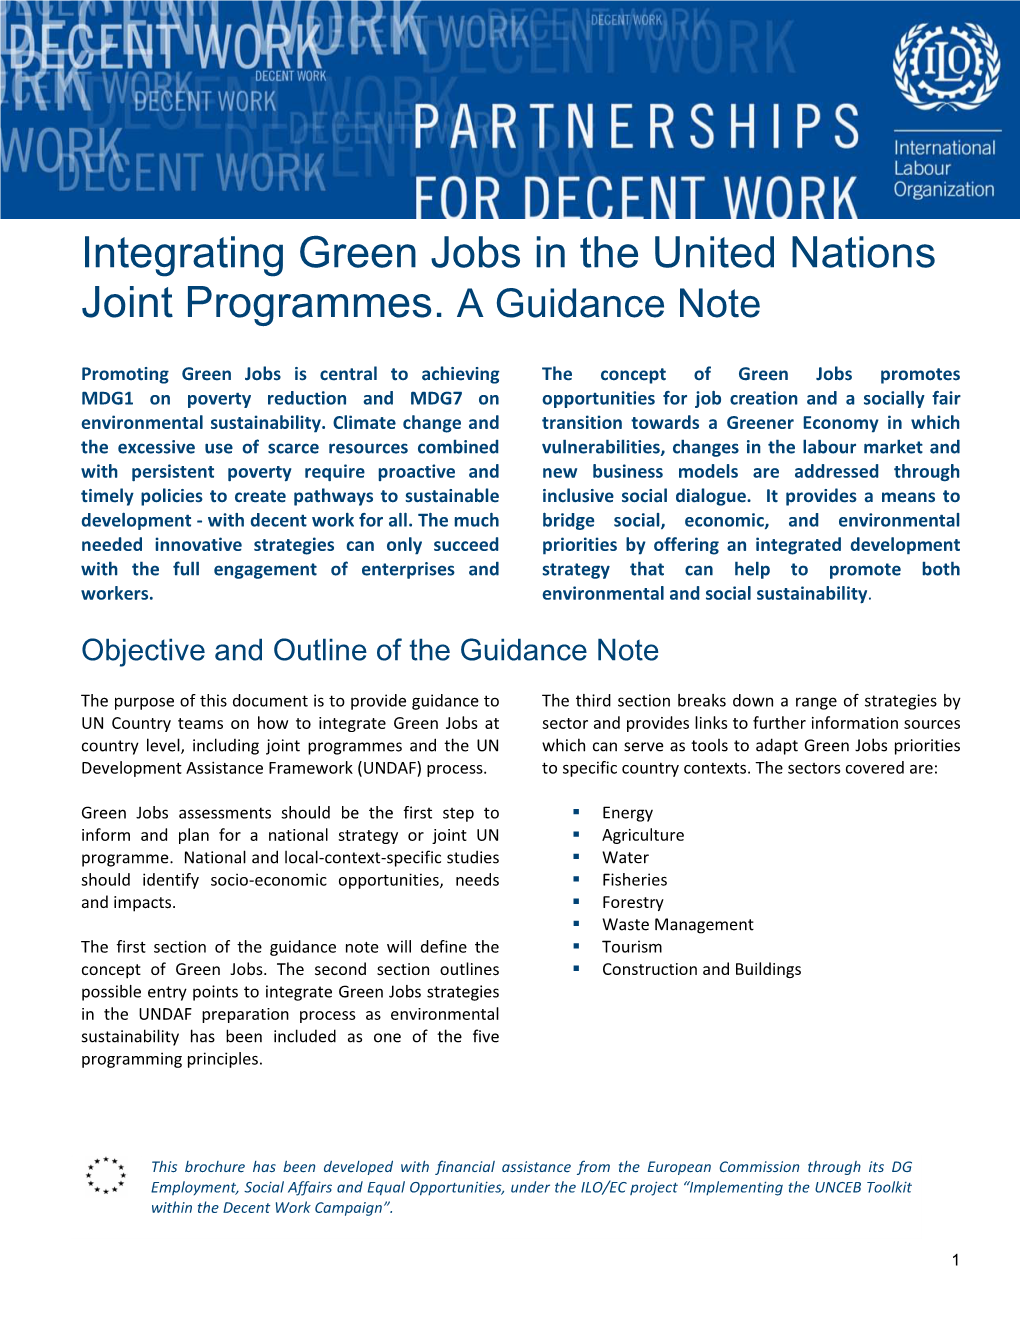 Integrating Green Jobs in the United Nations Joint Programmes